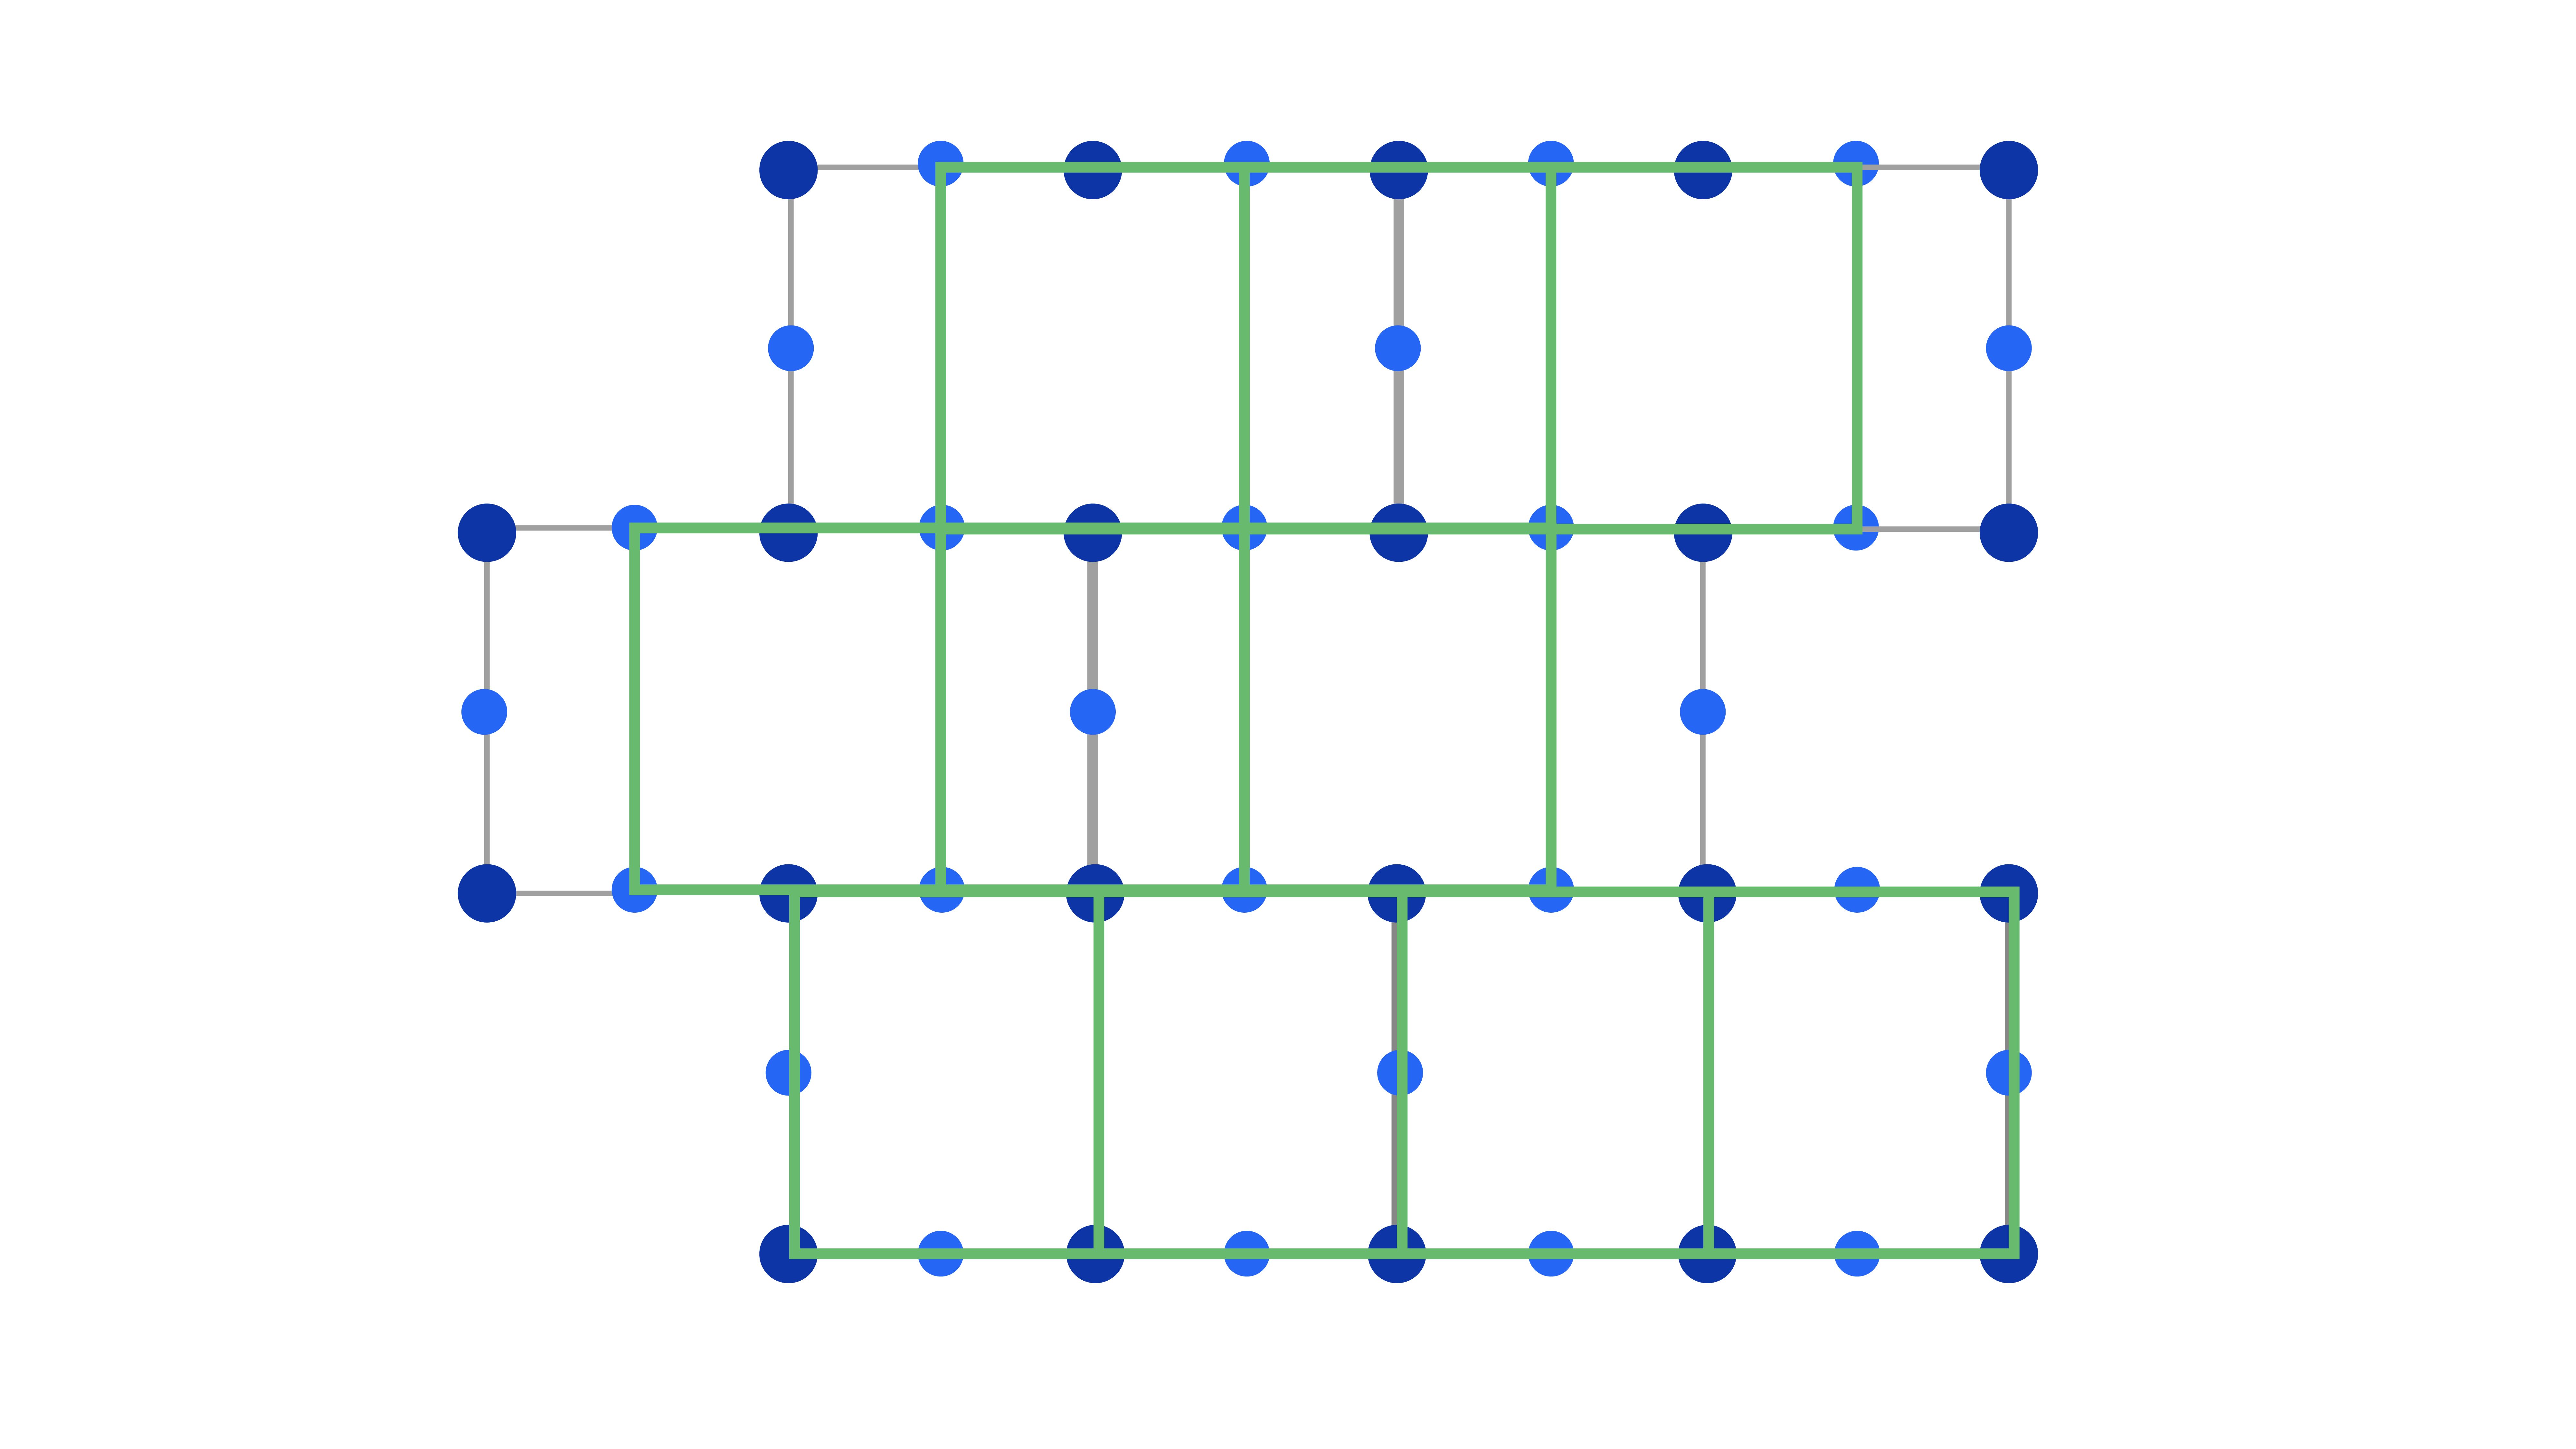 Direct mapping between heavy-hex and square lattices.